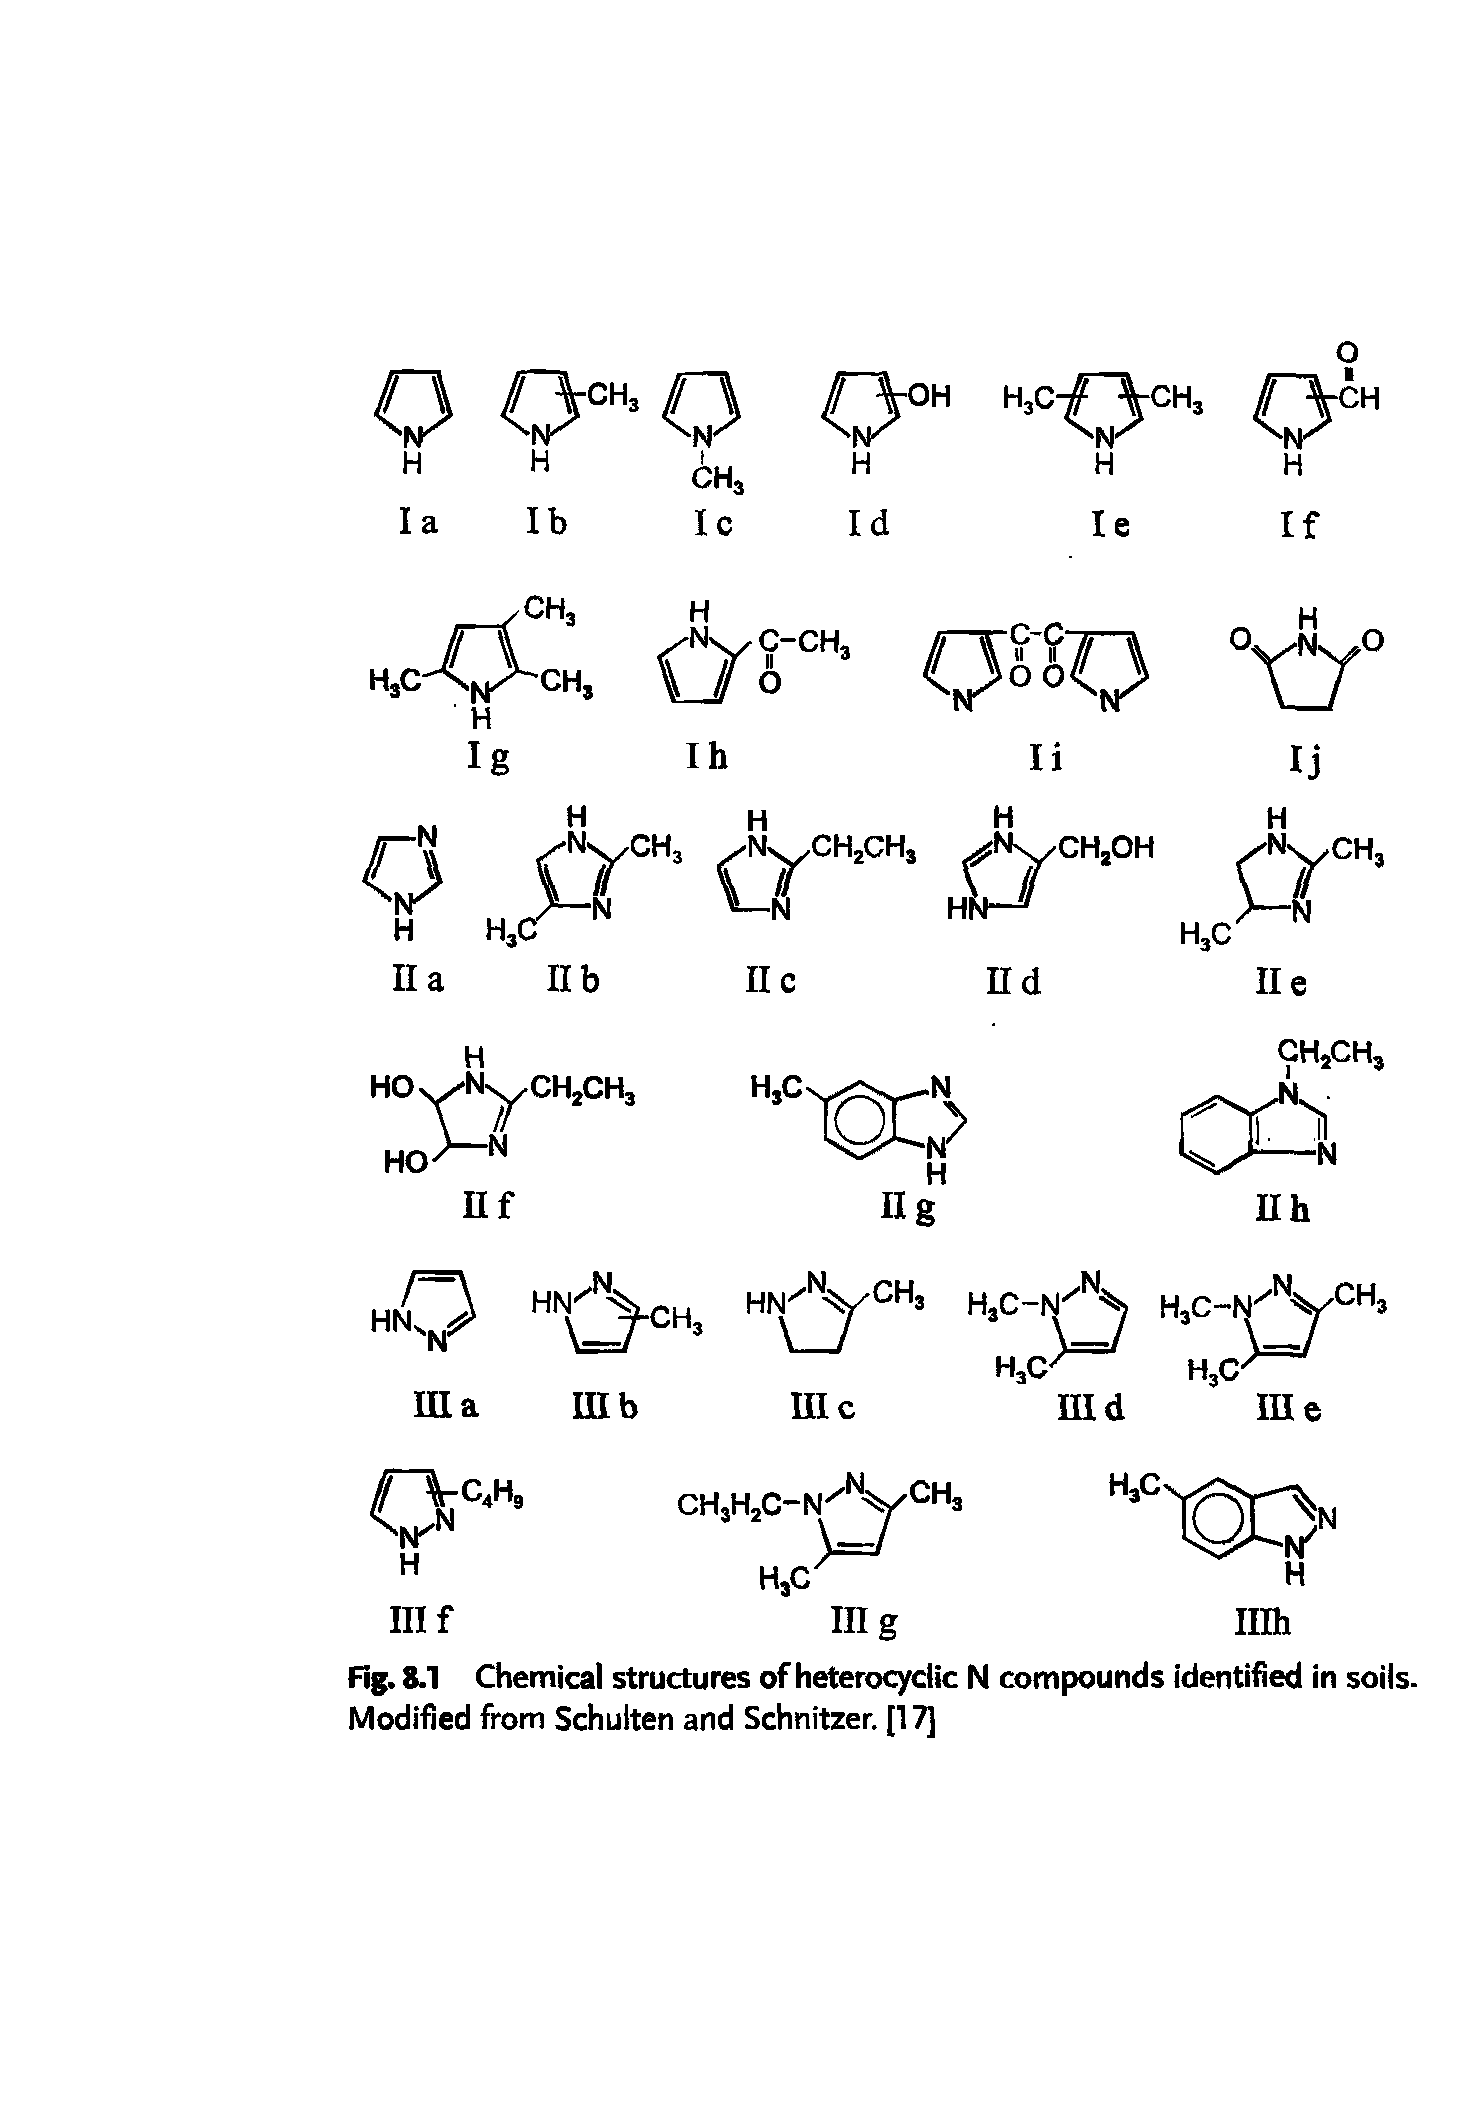 Fig. 8.1 Chemical structures of heterocyclic N compounds identified in soils. Modified from Schulten and Schnitzer. [17]...